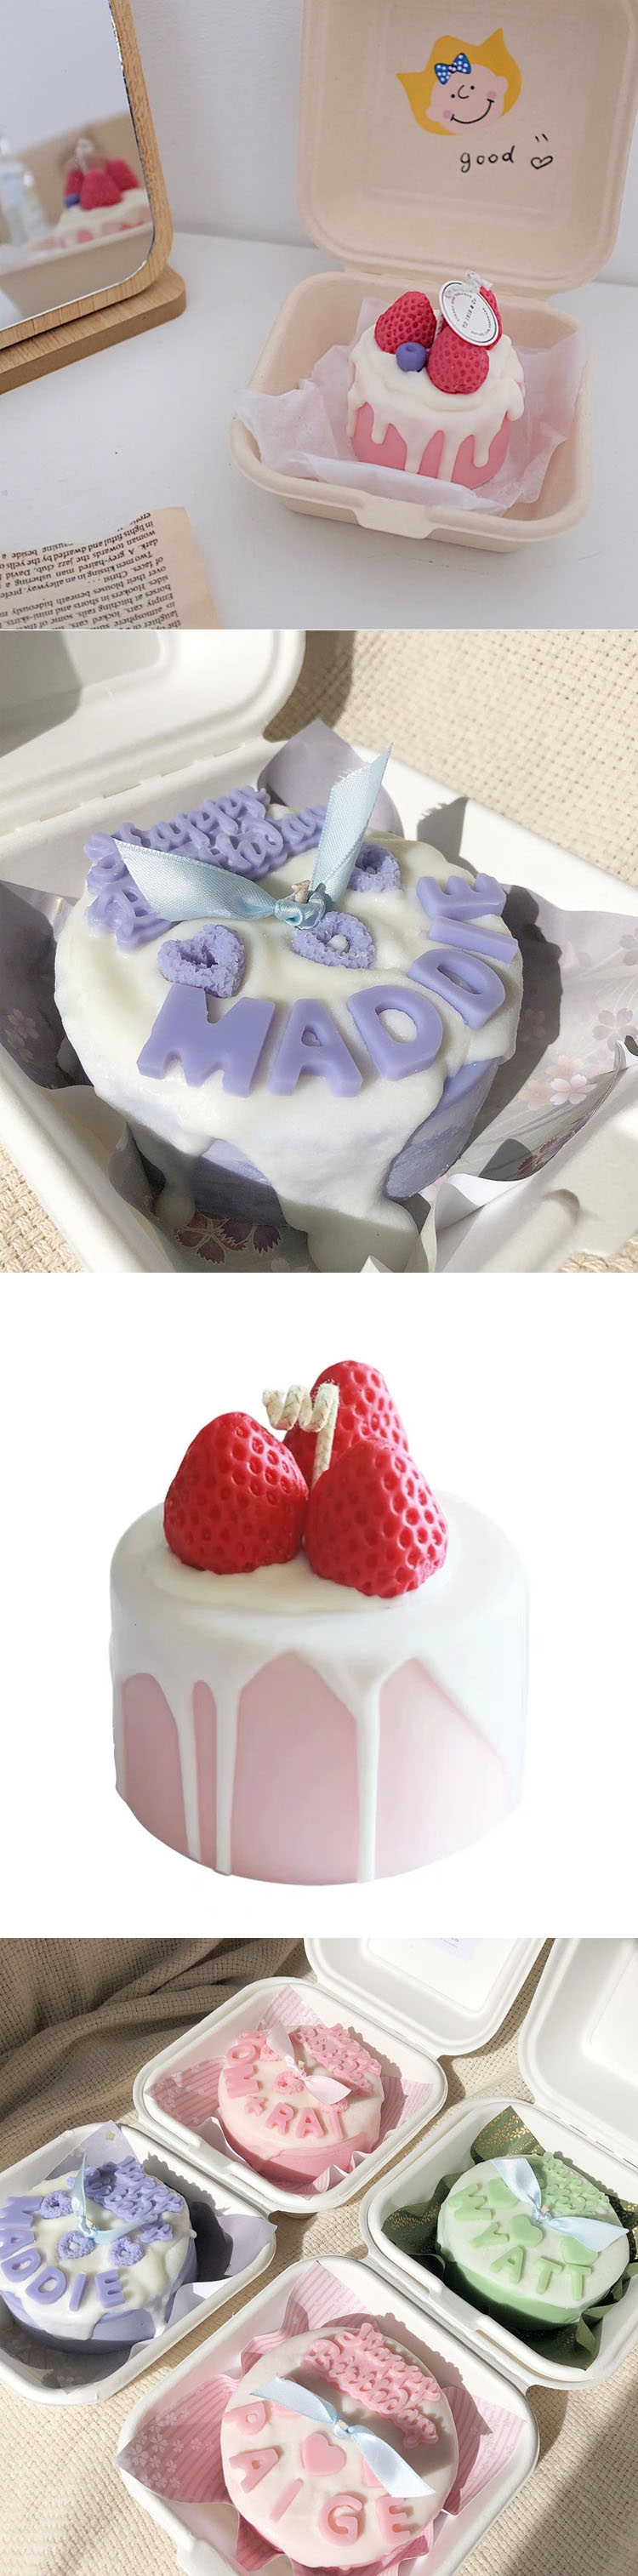 Cream Cake Home Decoration Gift Customization Of Fragrance Festival strawberry custom dessert Fruit Scented containers c